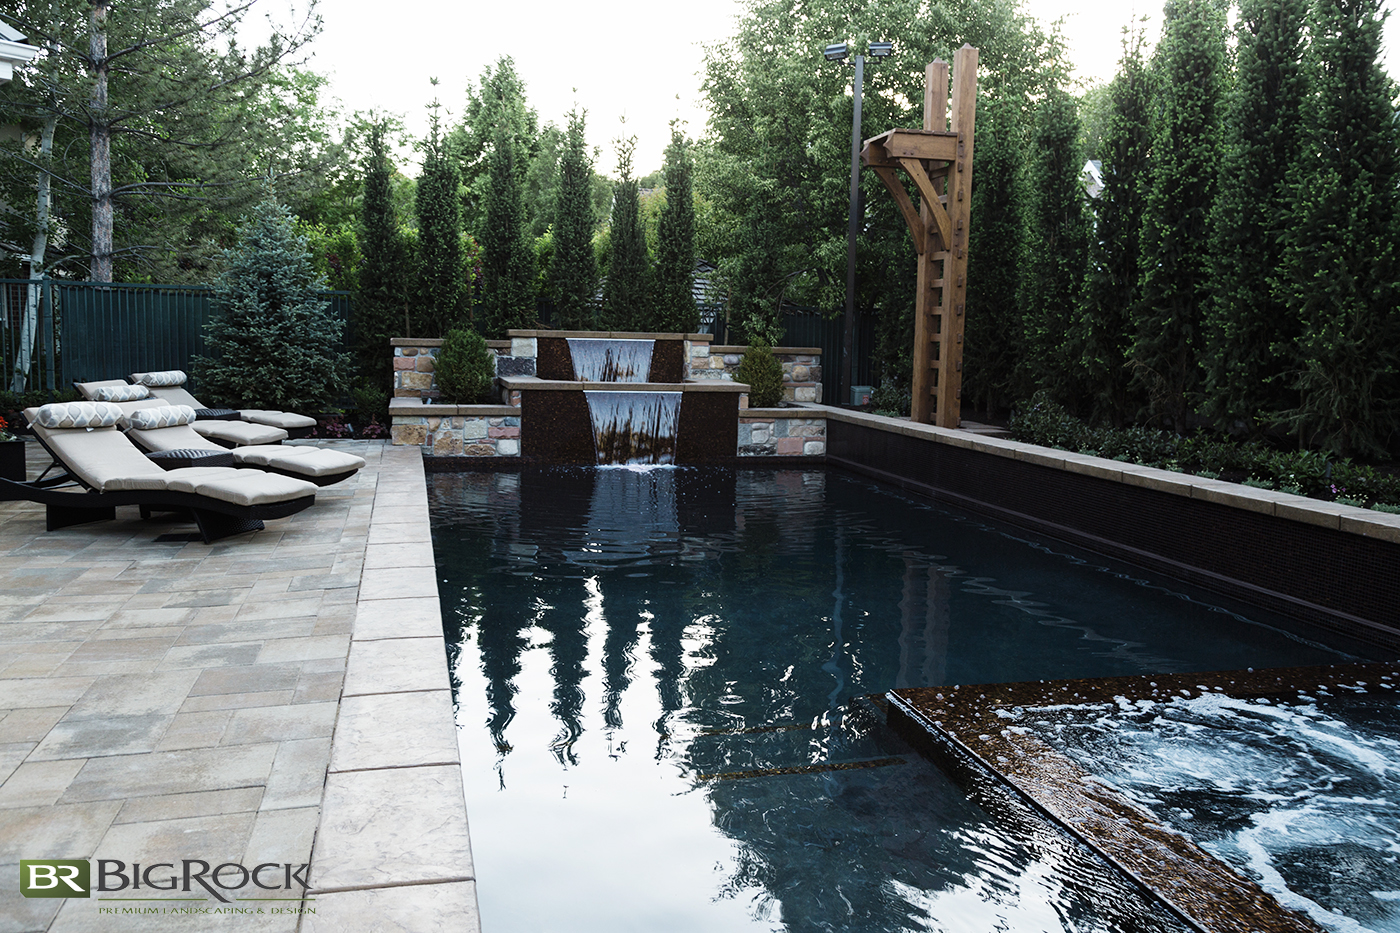 Big Rock Landscaping is a premiere luxury landscaping contractor that can create beauty, recreation and stunning designs regardless of the size of your yard.